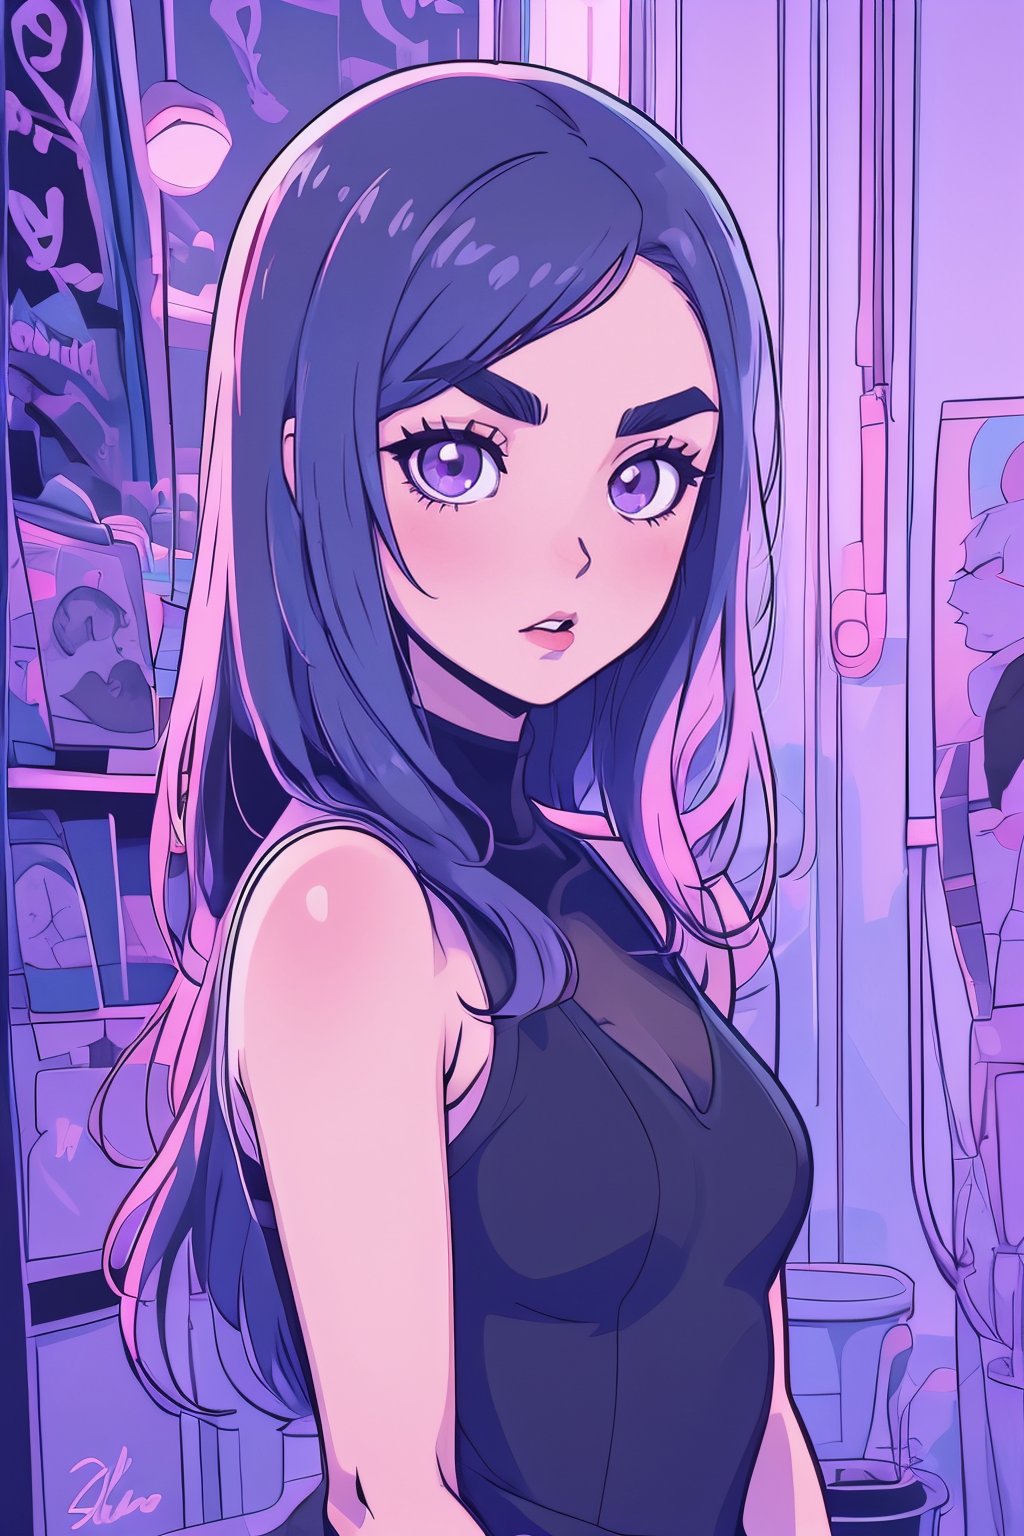 (((masterpiece))) anime style, cartoon, comic, anime comic, medium dark colors, soft tones, lighting details, generates an image of a 20-year-old a single gothic girl, black painted lips, pastel purple eyes, long black hair dark pastel purple background, the girls hair reaches her eyebrows, defined eyebrows